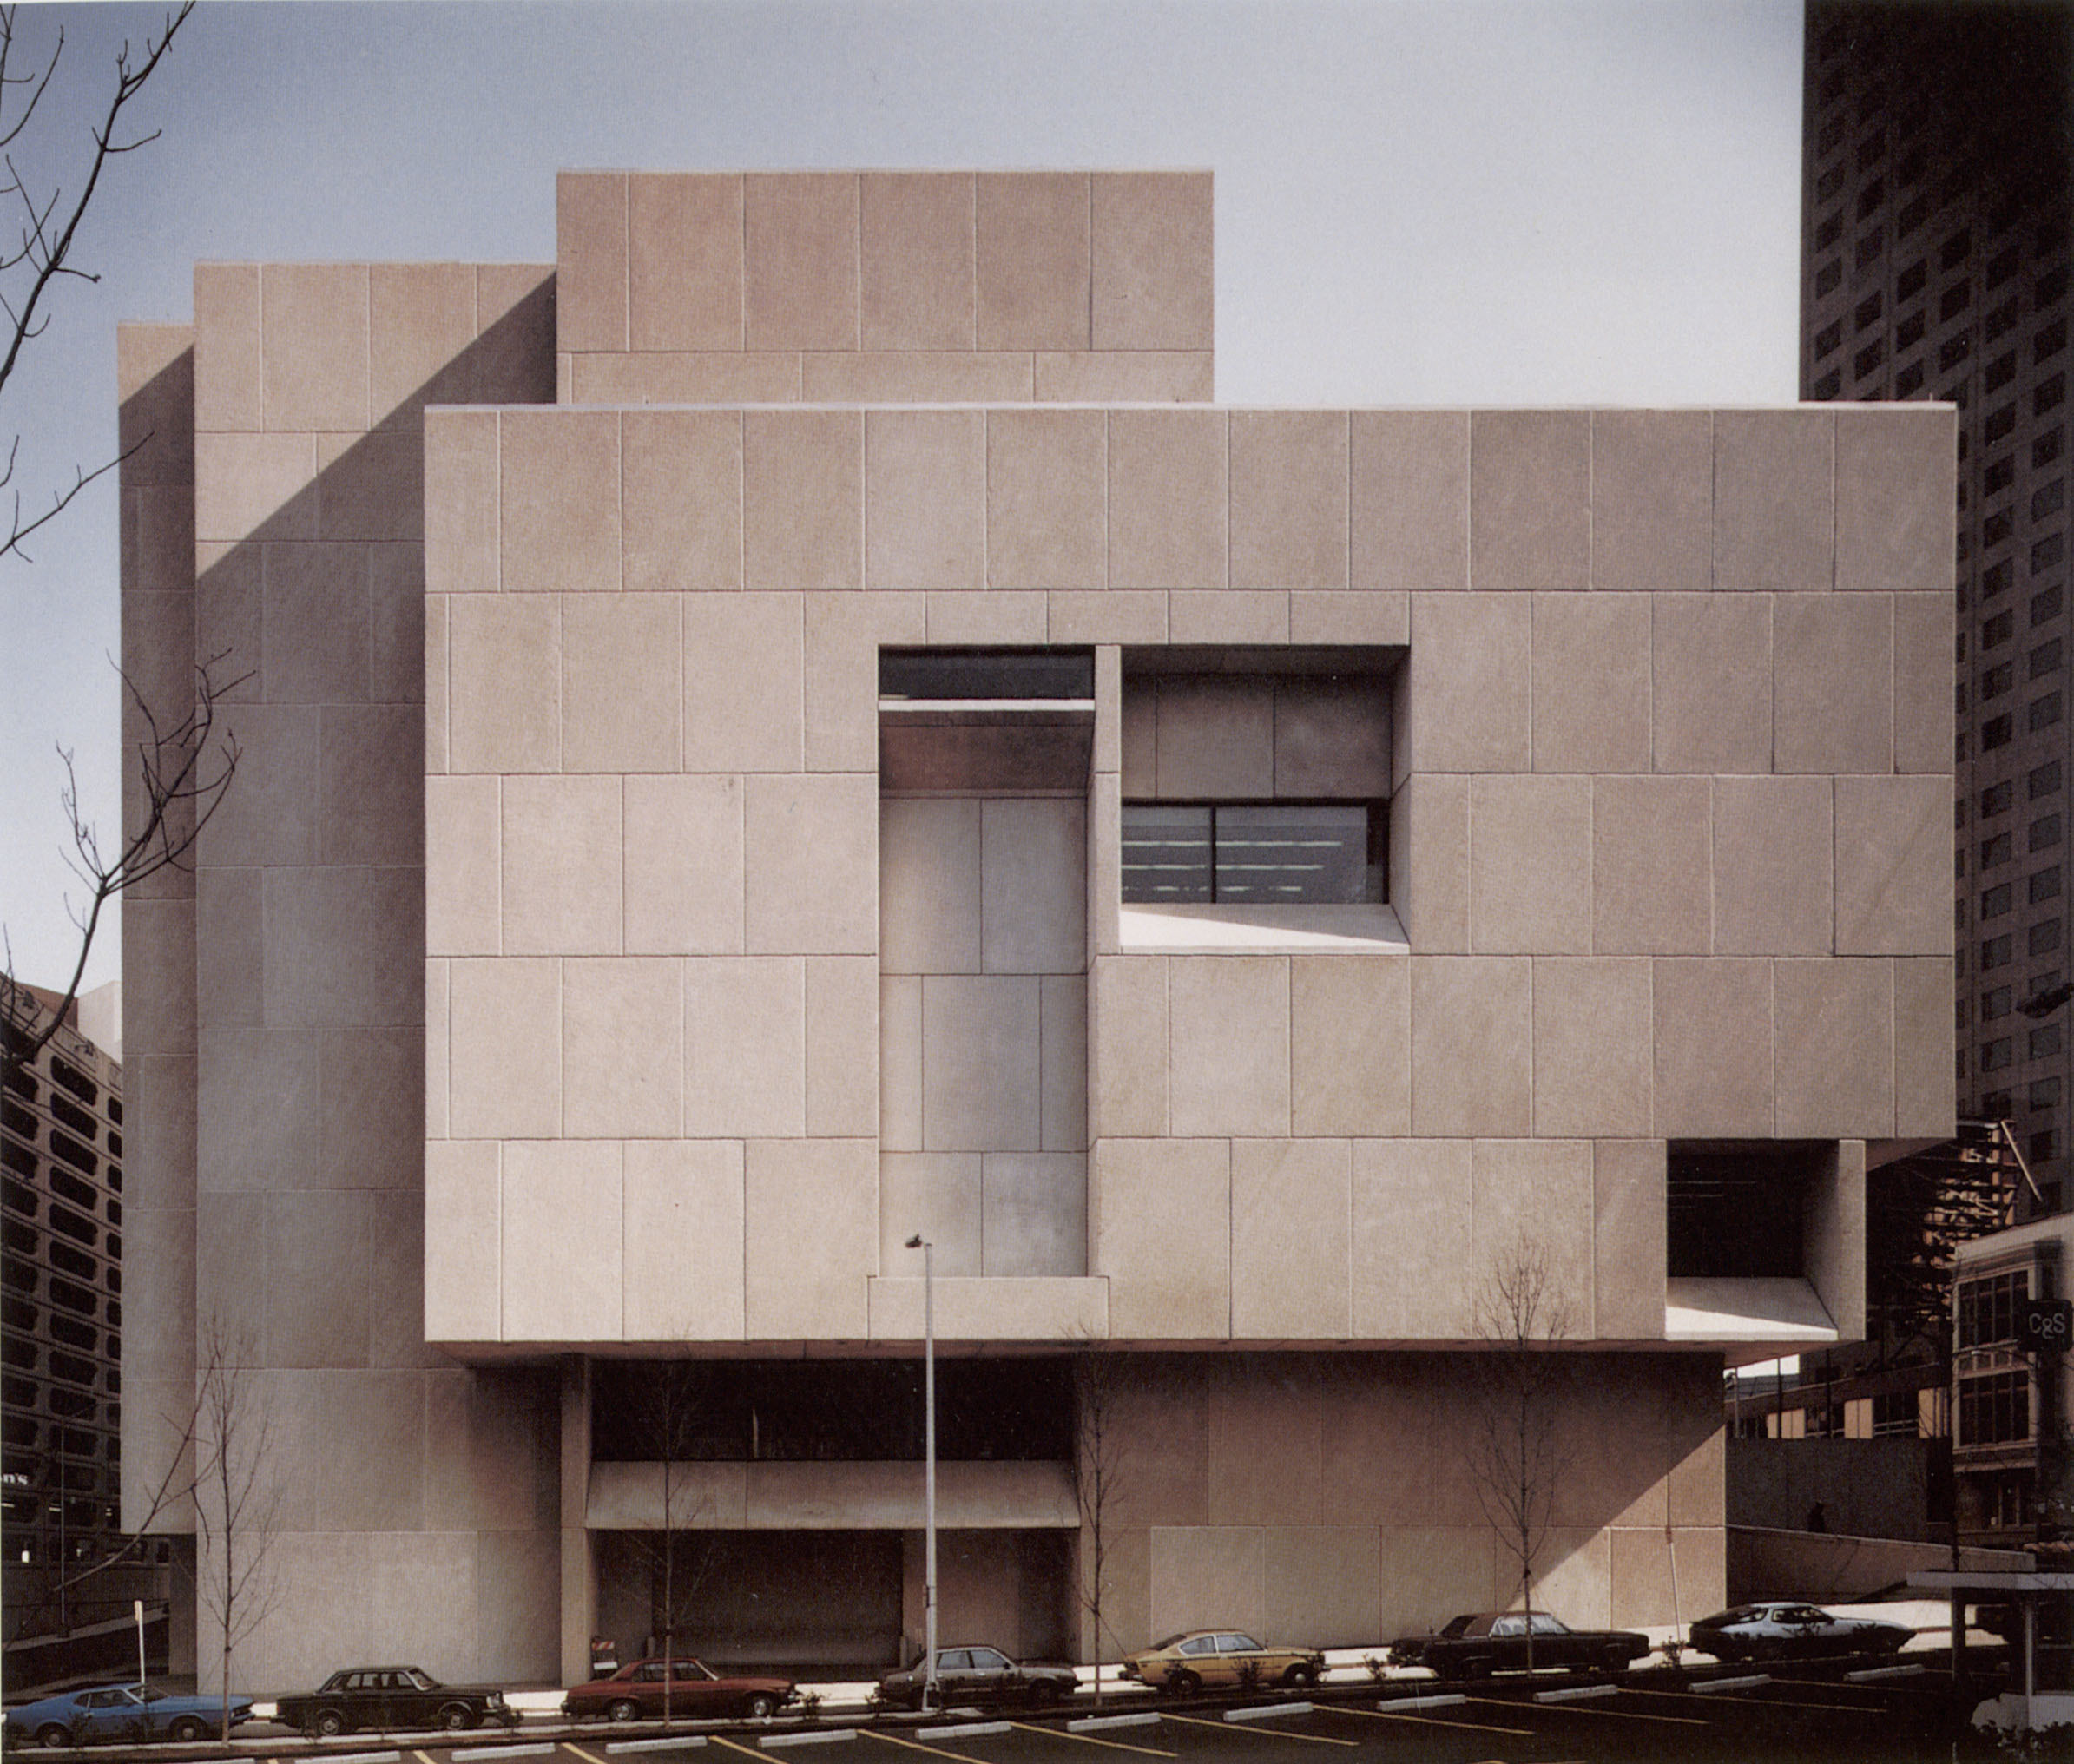 Design Icon: 10 Buildings by Marcel Breuer - Dwell